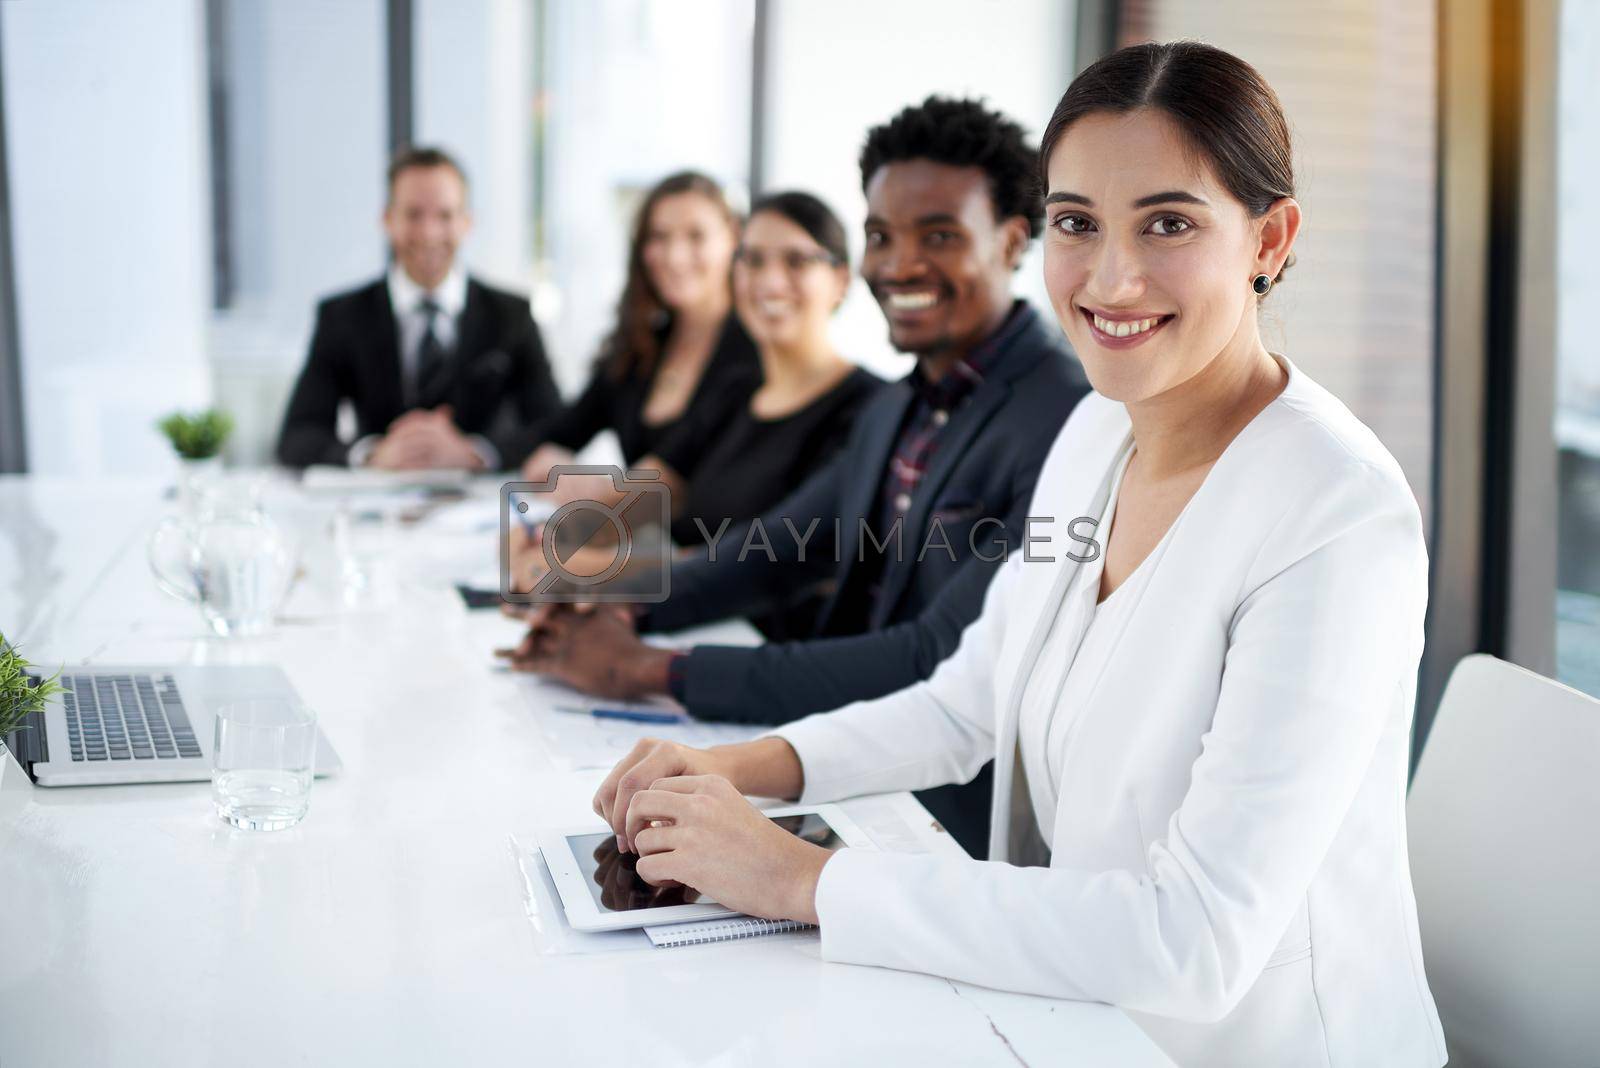 Royalty free image of Exceeding in business together. Portrait of a group of business colleagues meeting in the boardroom. by YuriArcurs